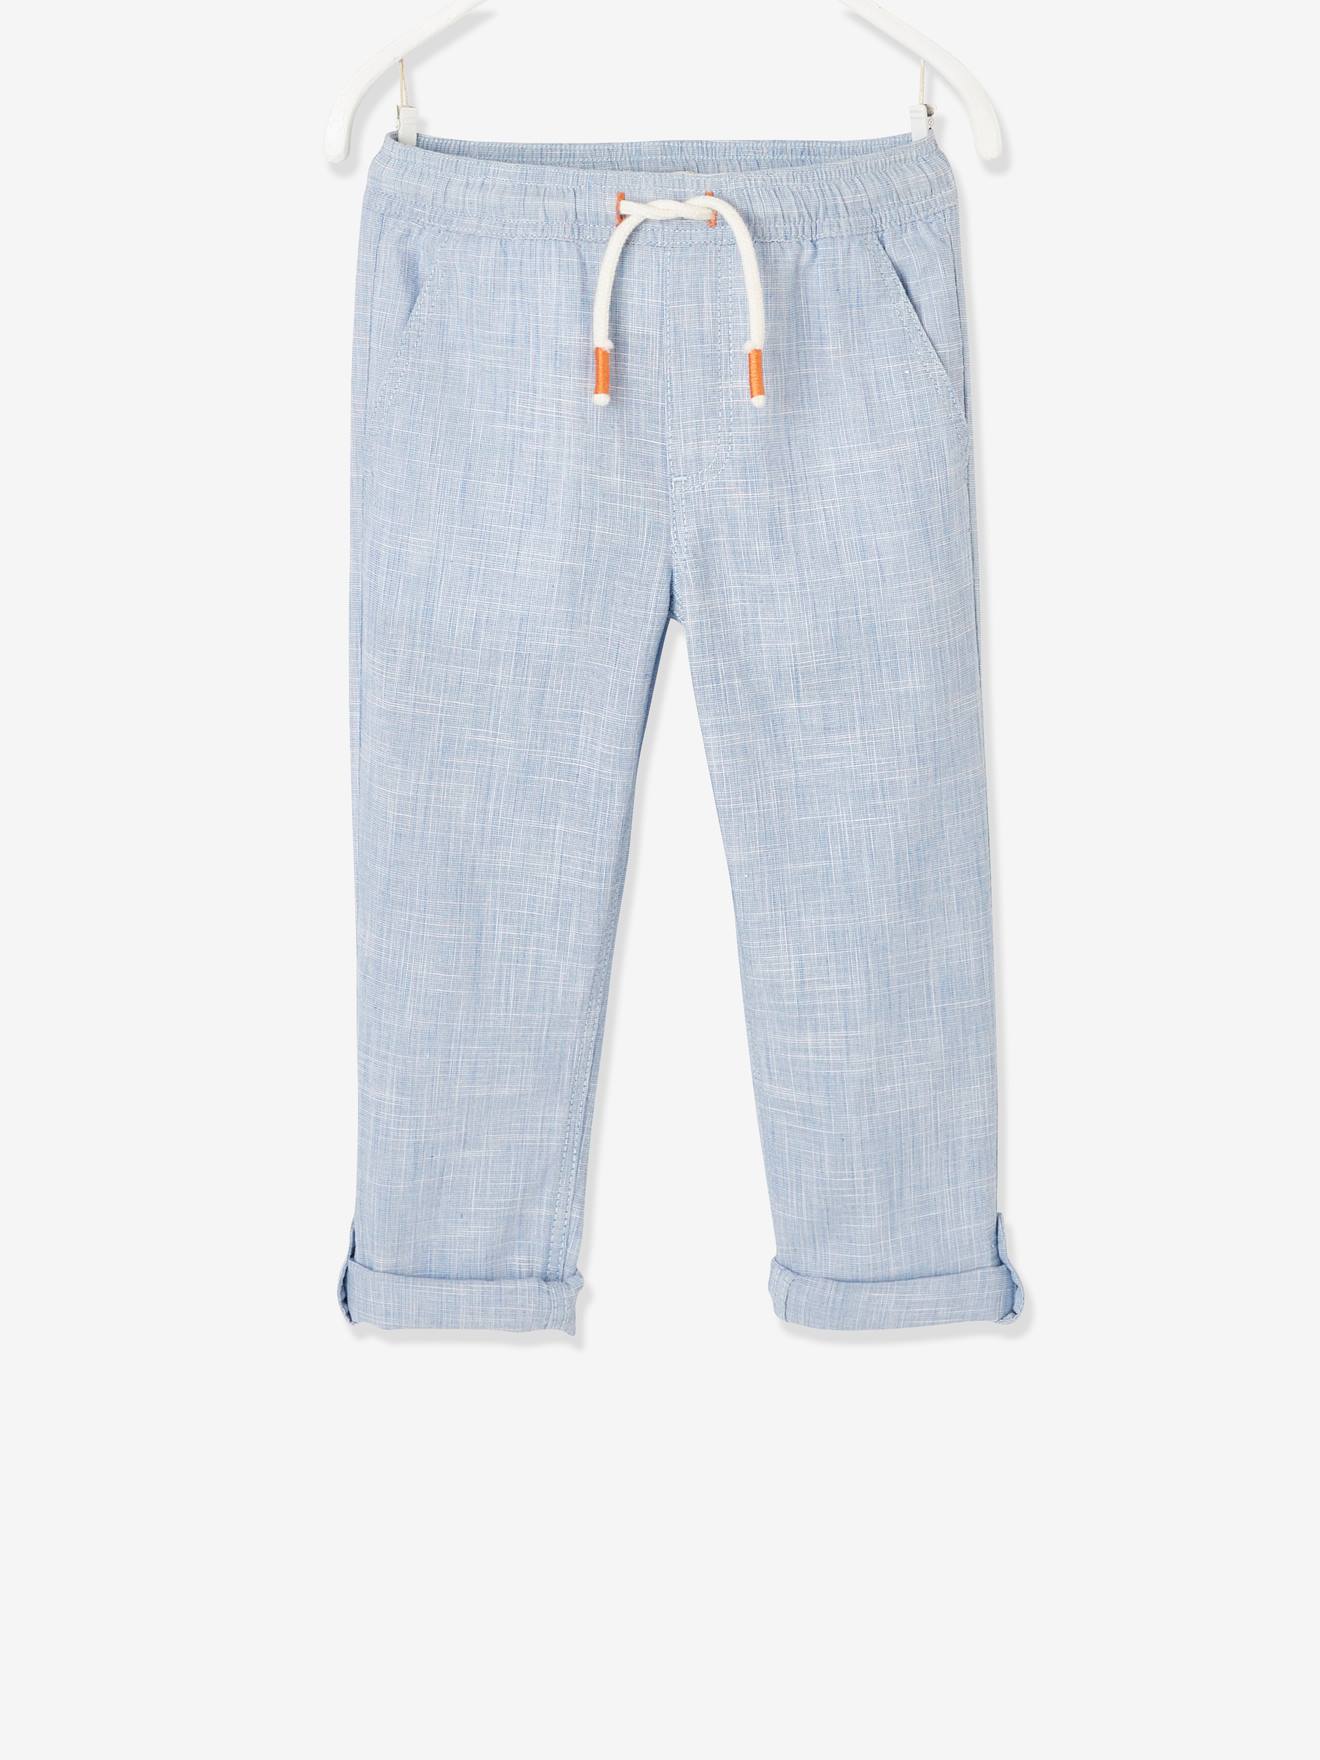 Trousers, Convert into Cropped Trousers, in Lightweight Fabric, for Boys light blue